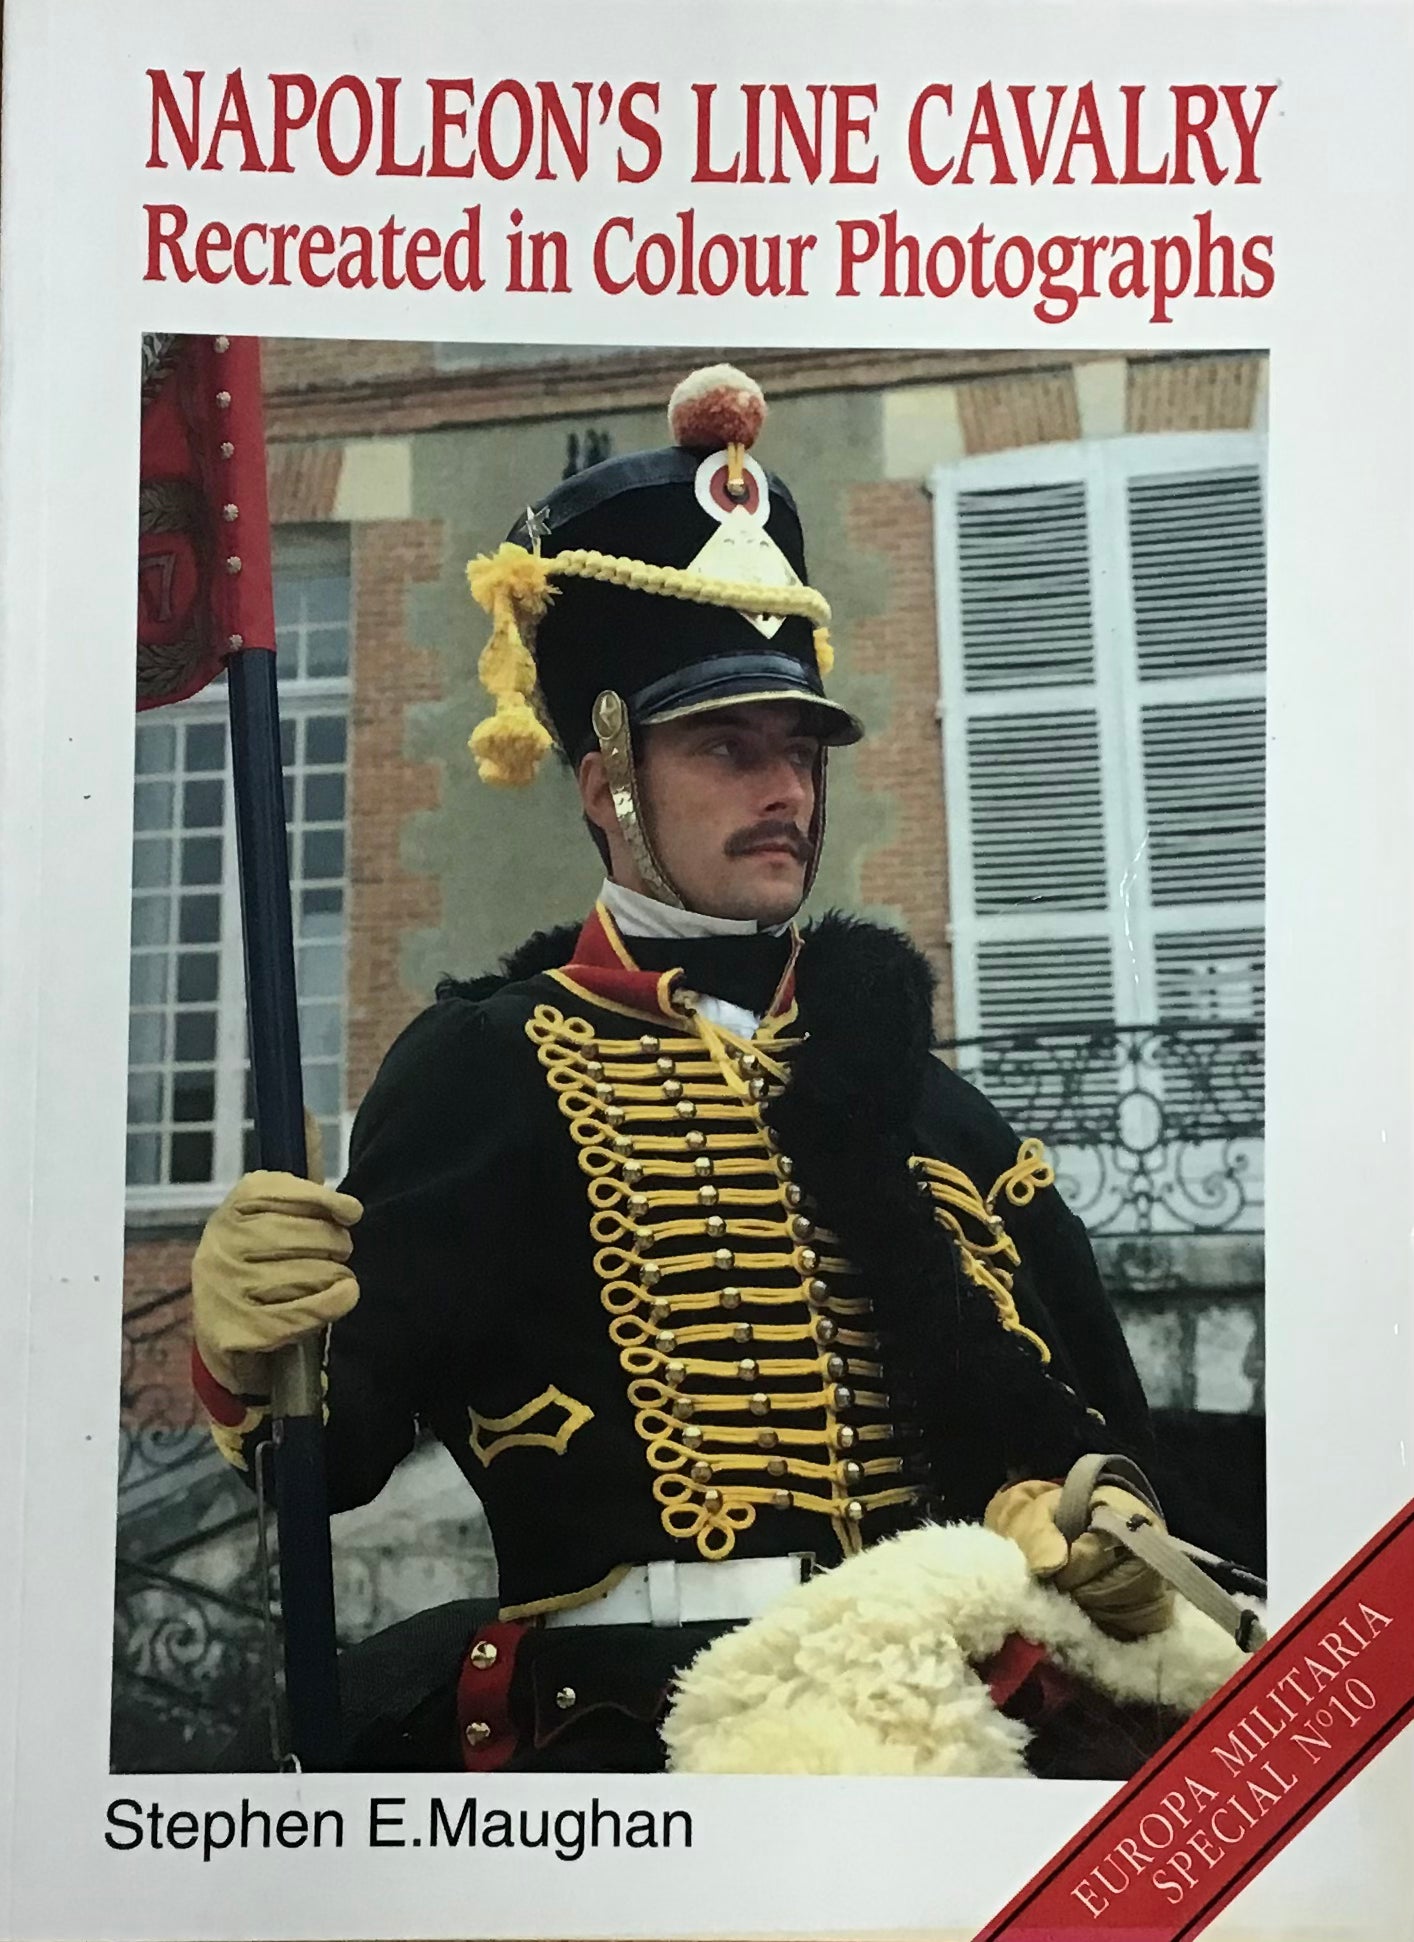 Napoleon's Line Cavalry Recreated in Colour Photographs by Stephen E. Maughan - Chester Model Centre